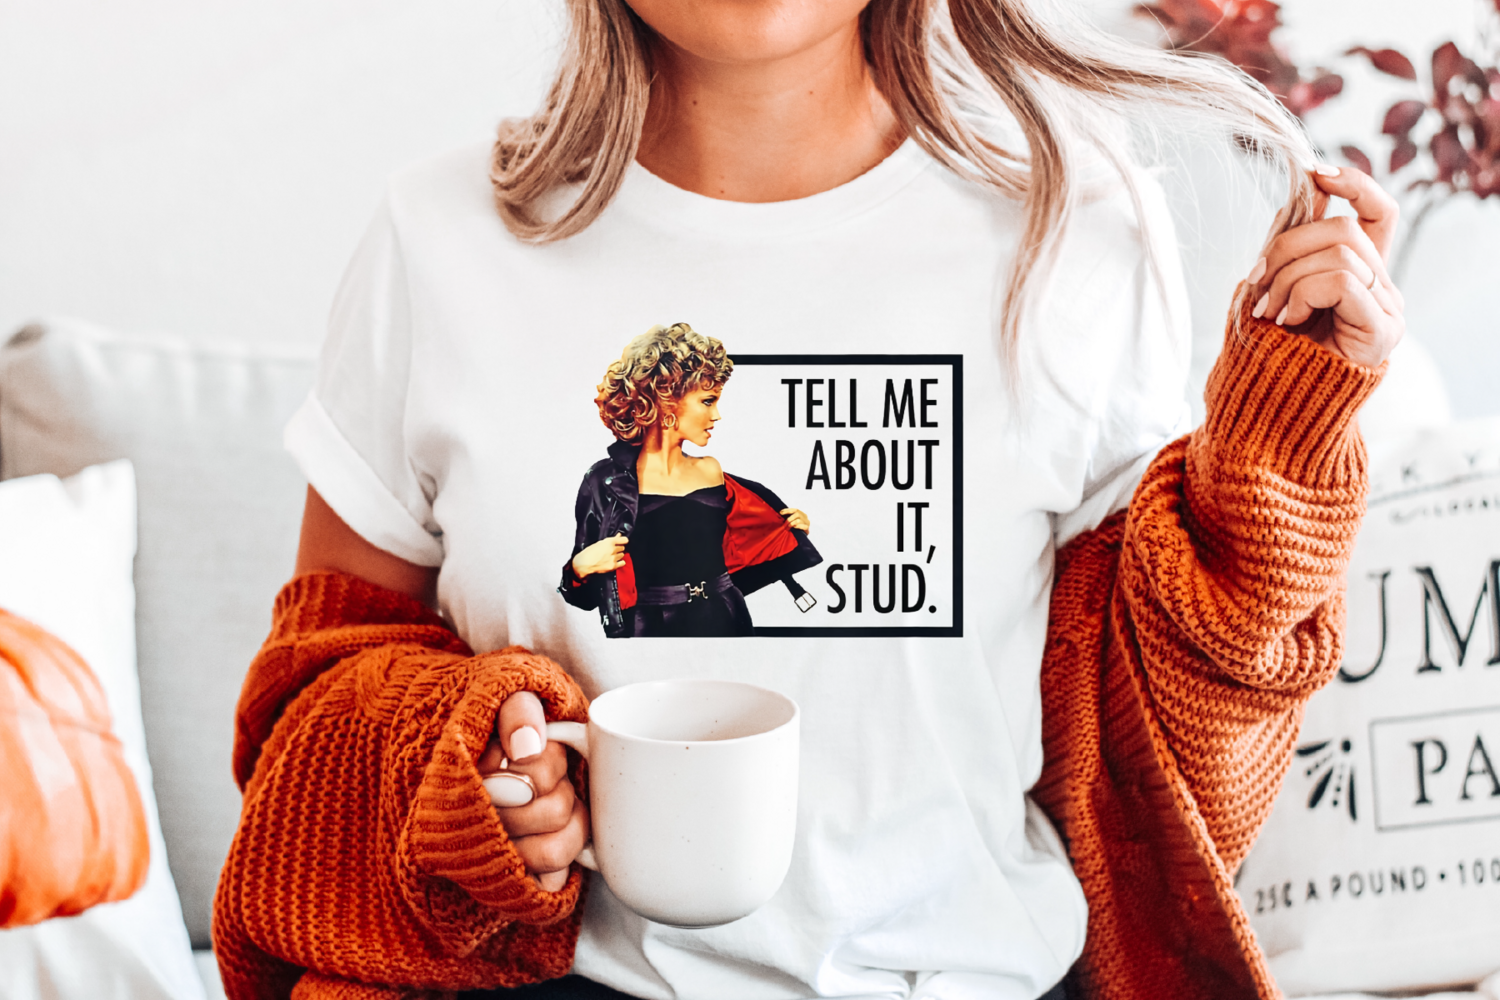 Olivia Tell me about it, stud Shirt